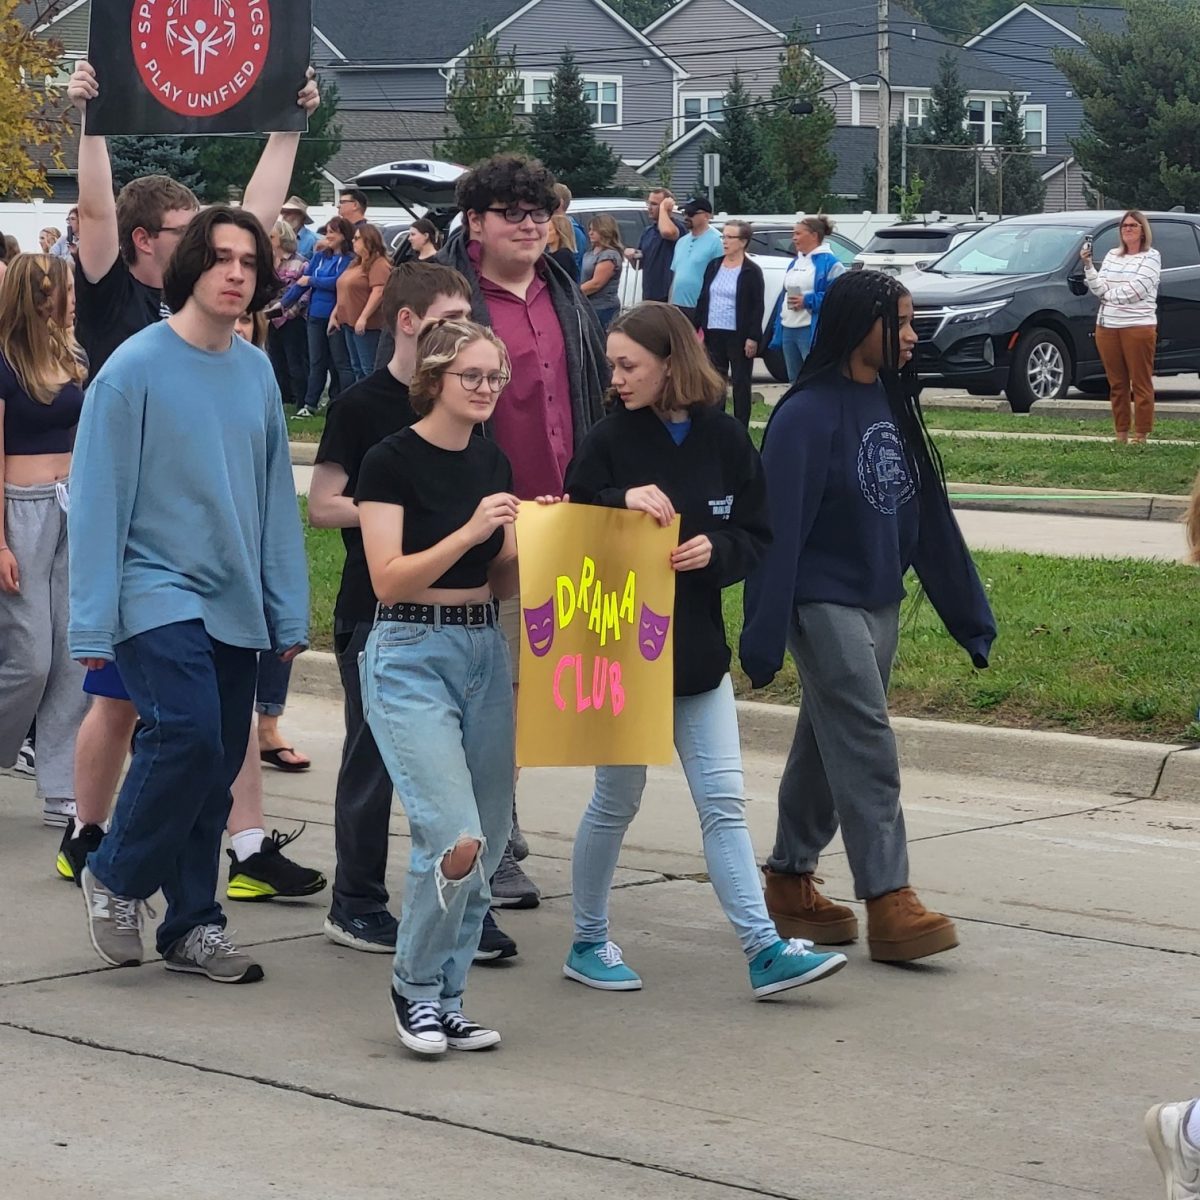 Members of drama club walk in the Homecoming Parade. 
Photo contributed by Angela Lundy